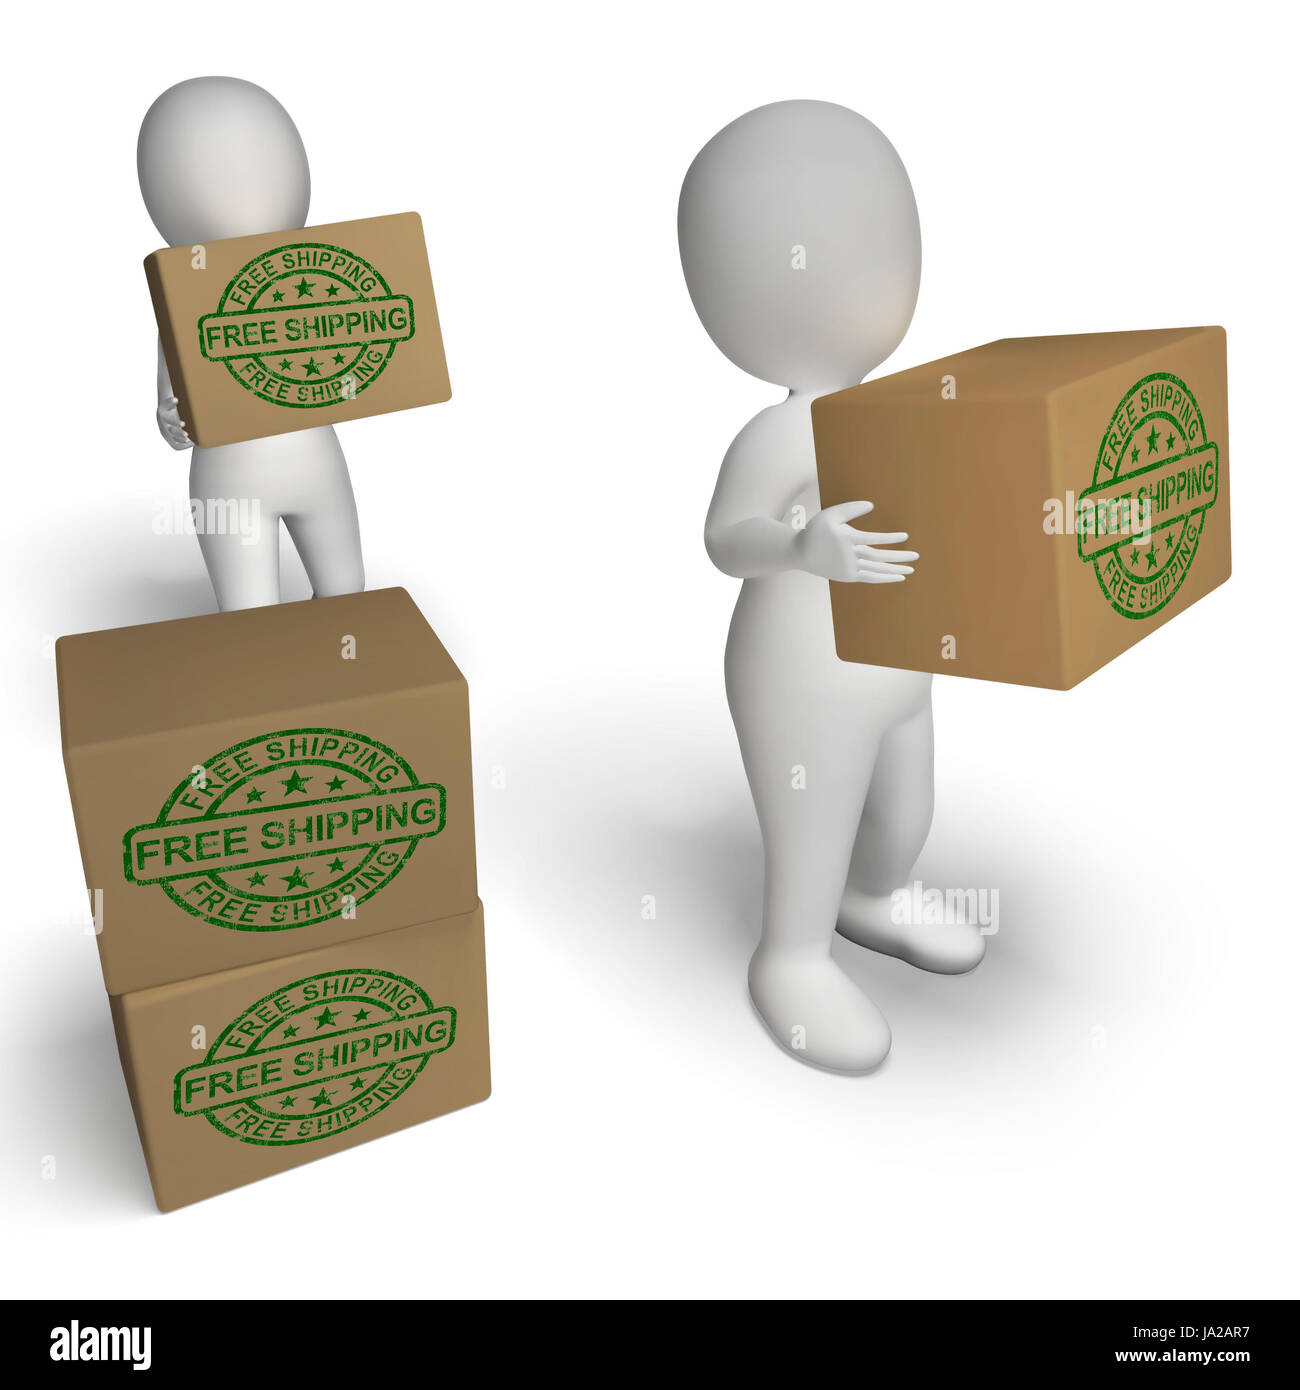 traffic, transportation, package, shipment, deliver, shipping, delivery, Stock Photo